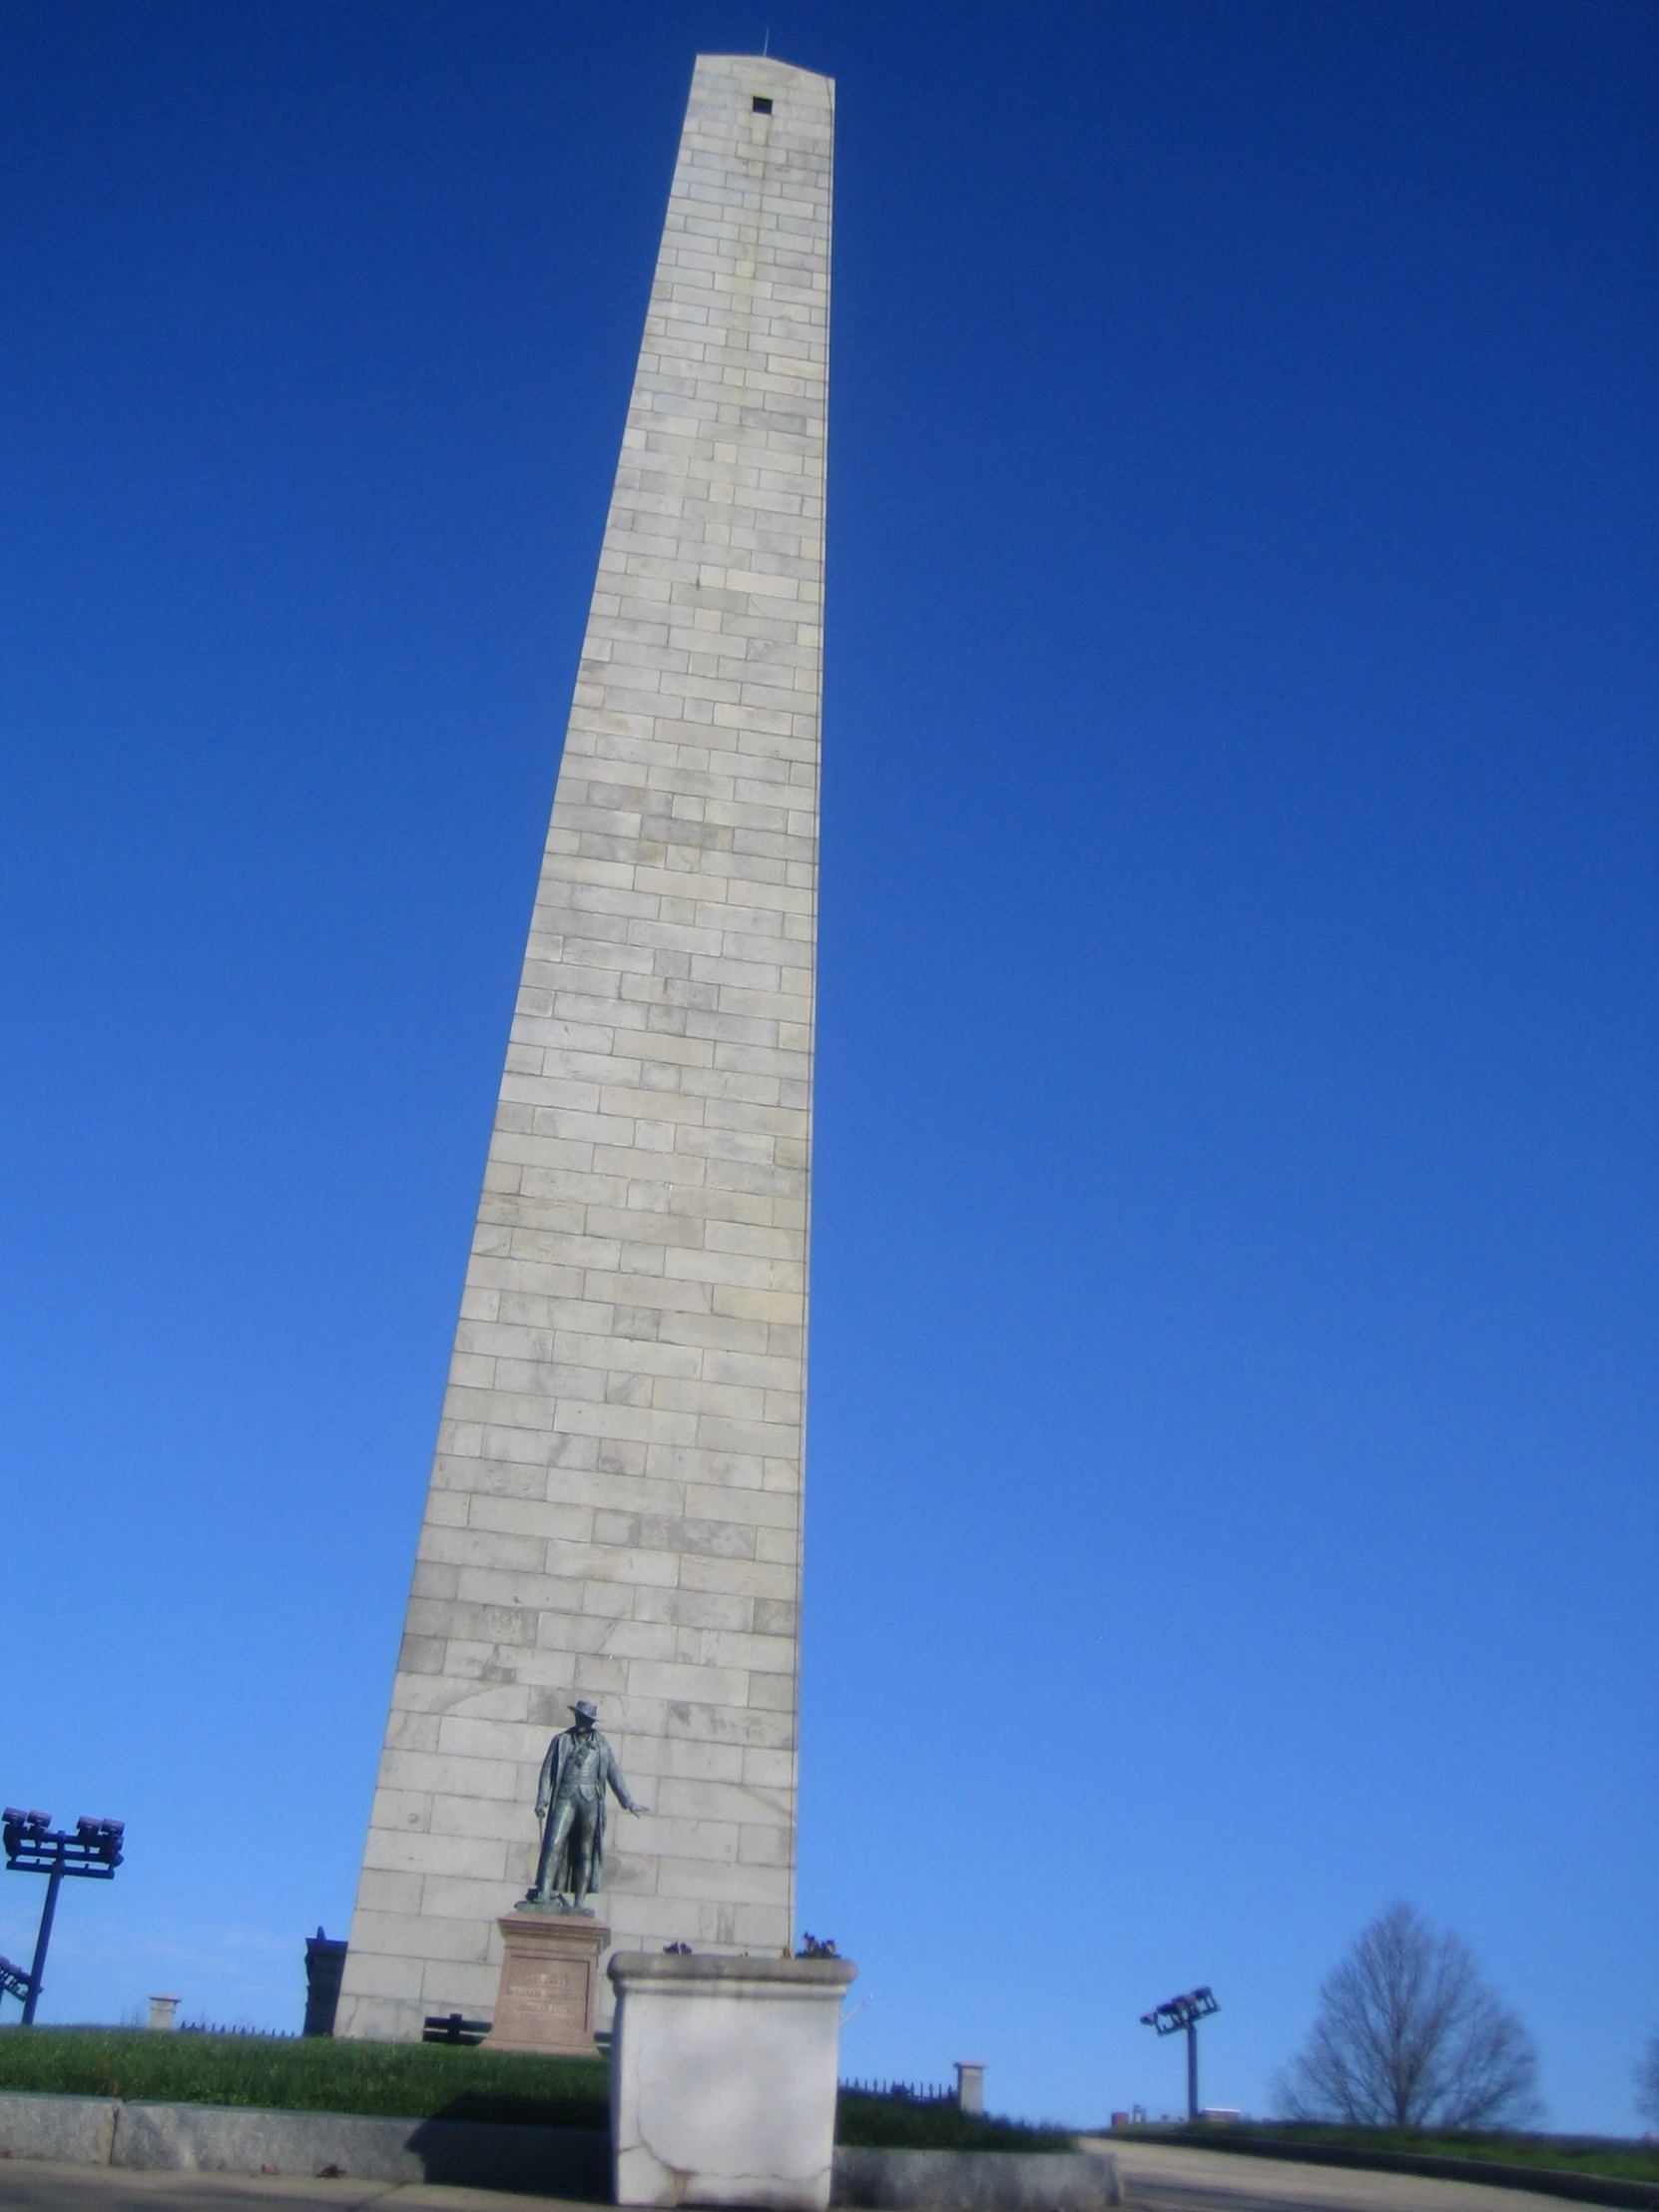 there is a tall monument near the road